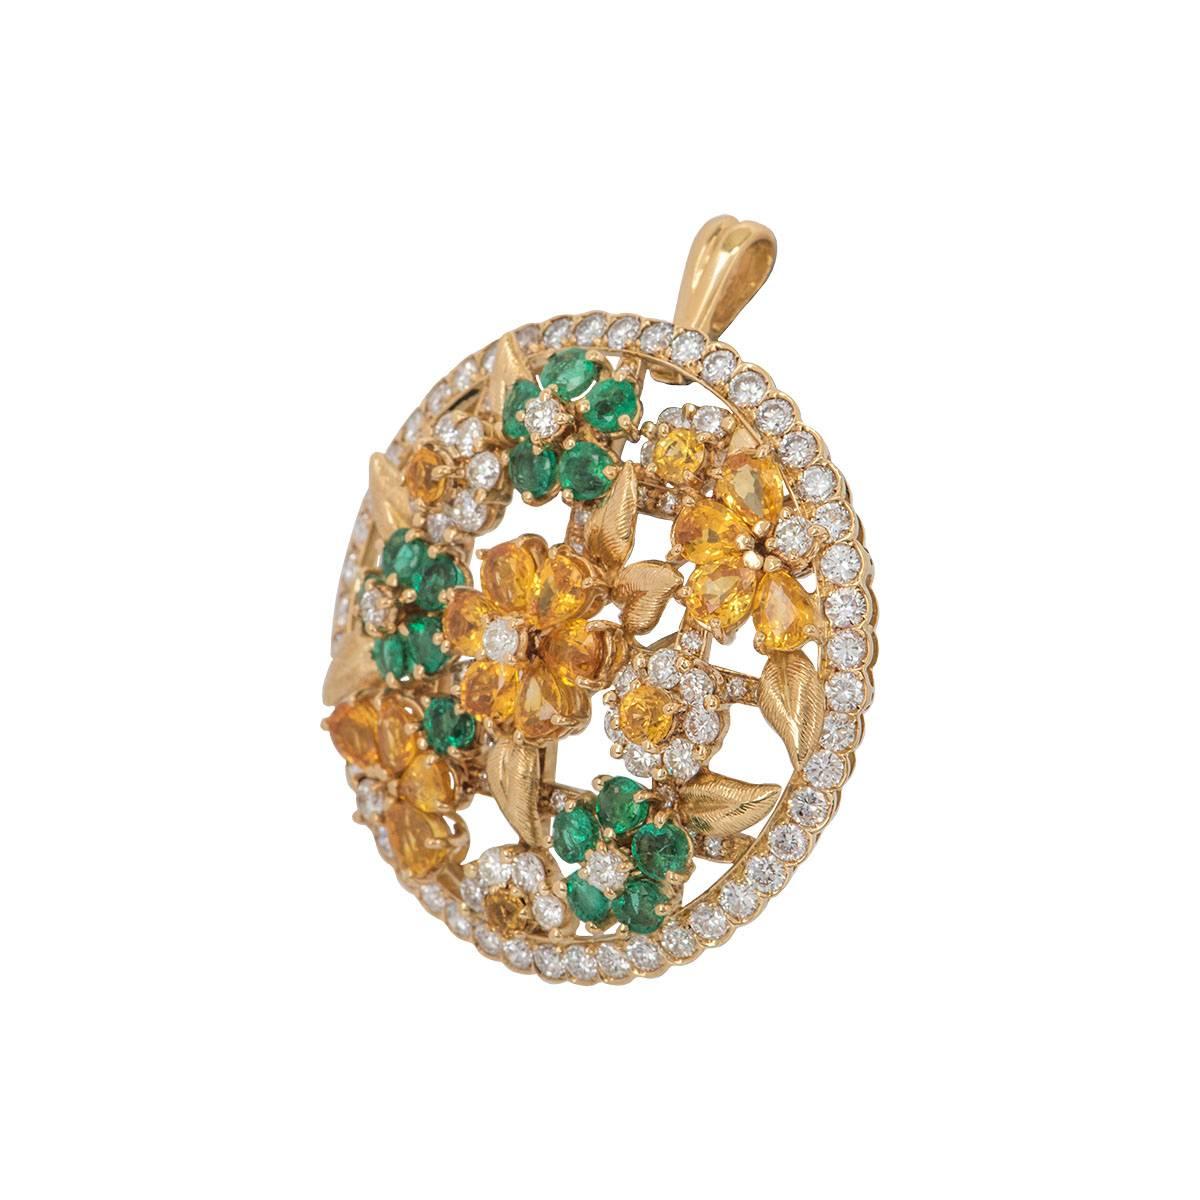 A large 18k yellow gold floral pendant/brooch. The pendant/brooch features an open work circular motif with round brilliant cut diamonds around the outer edge in a rub over setting. The centre of the pendant/brooch consists of a floral design set